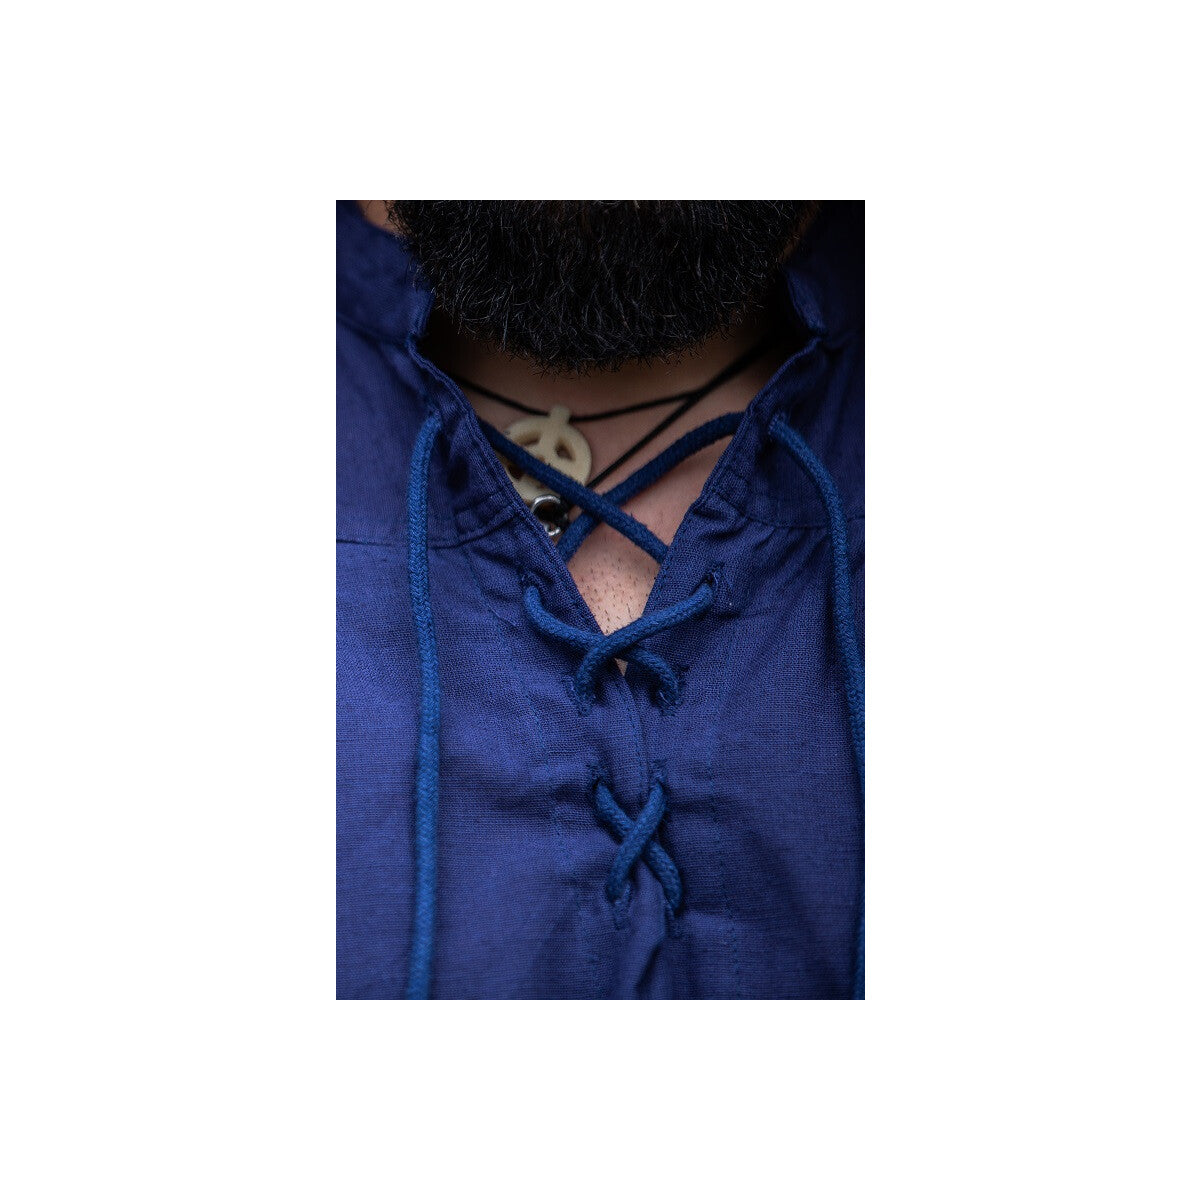 Sleeveless stand-up collar lace-up shirt "Louis" Blue